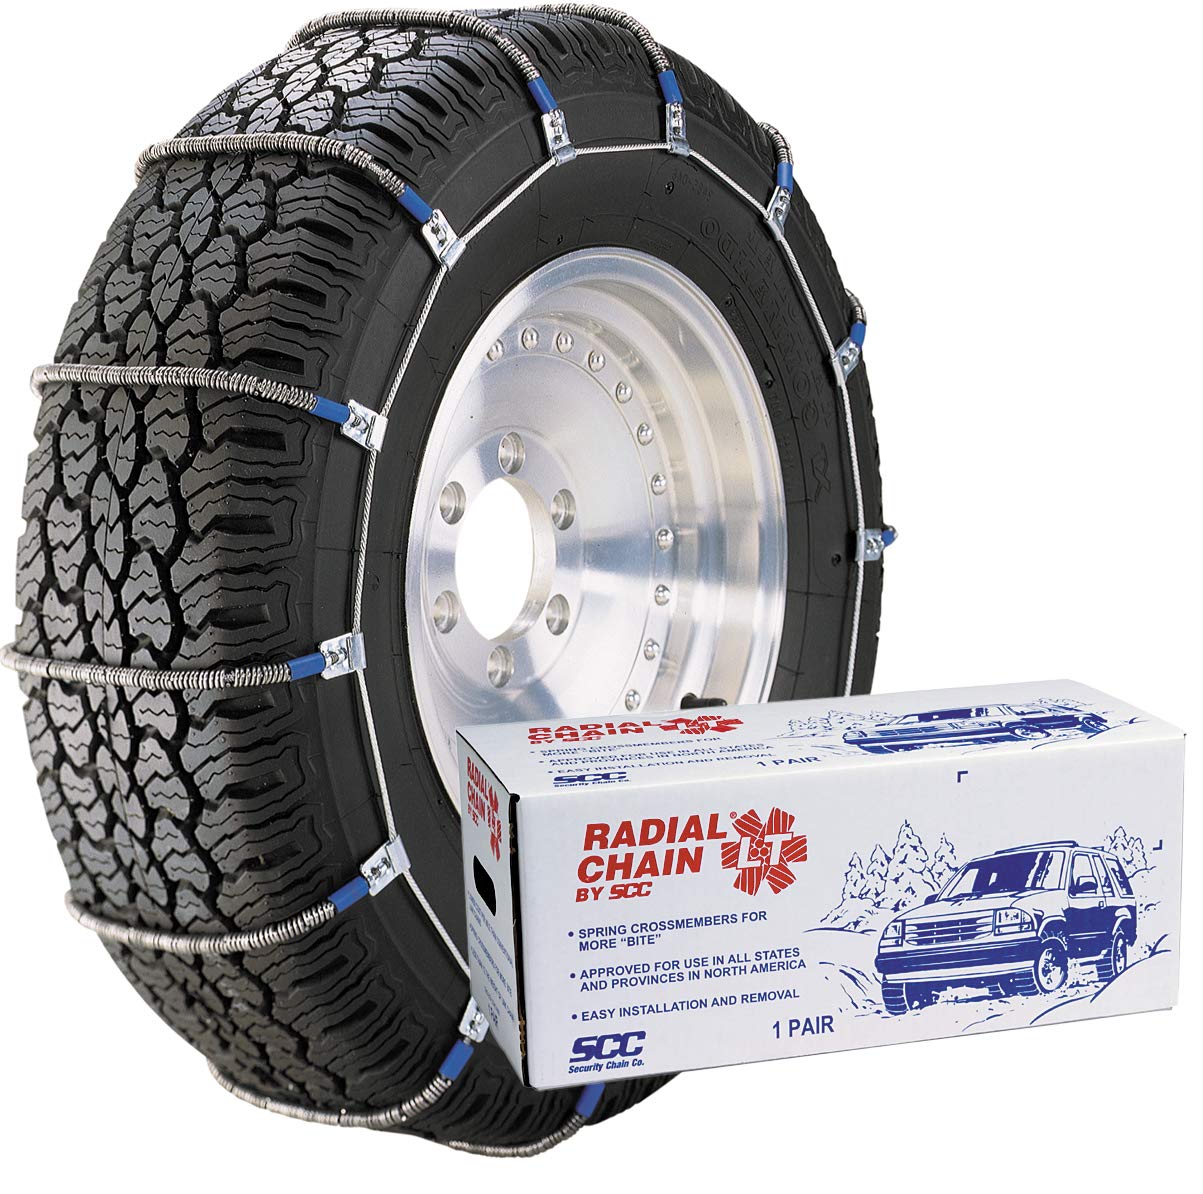 Security Chain Company TC2111MM Radial Chain LT Cable Tire Traction Chain  for Light Trucks - Set of 2- Buy Online in Antigua and Barbuda at  antigua.desertcart.com. ProductId : 11842655.